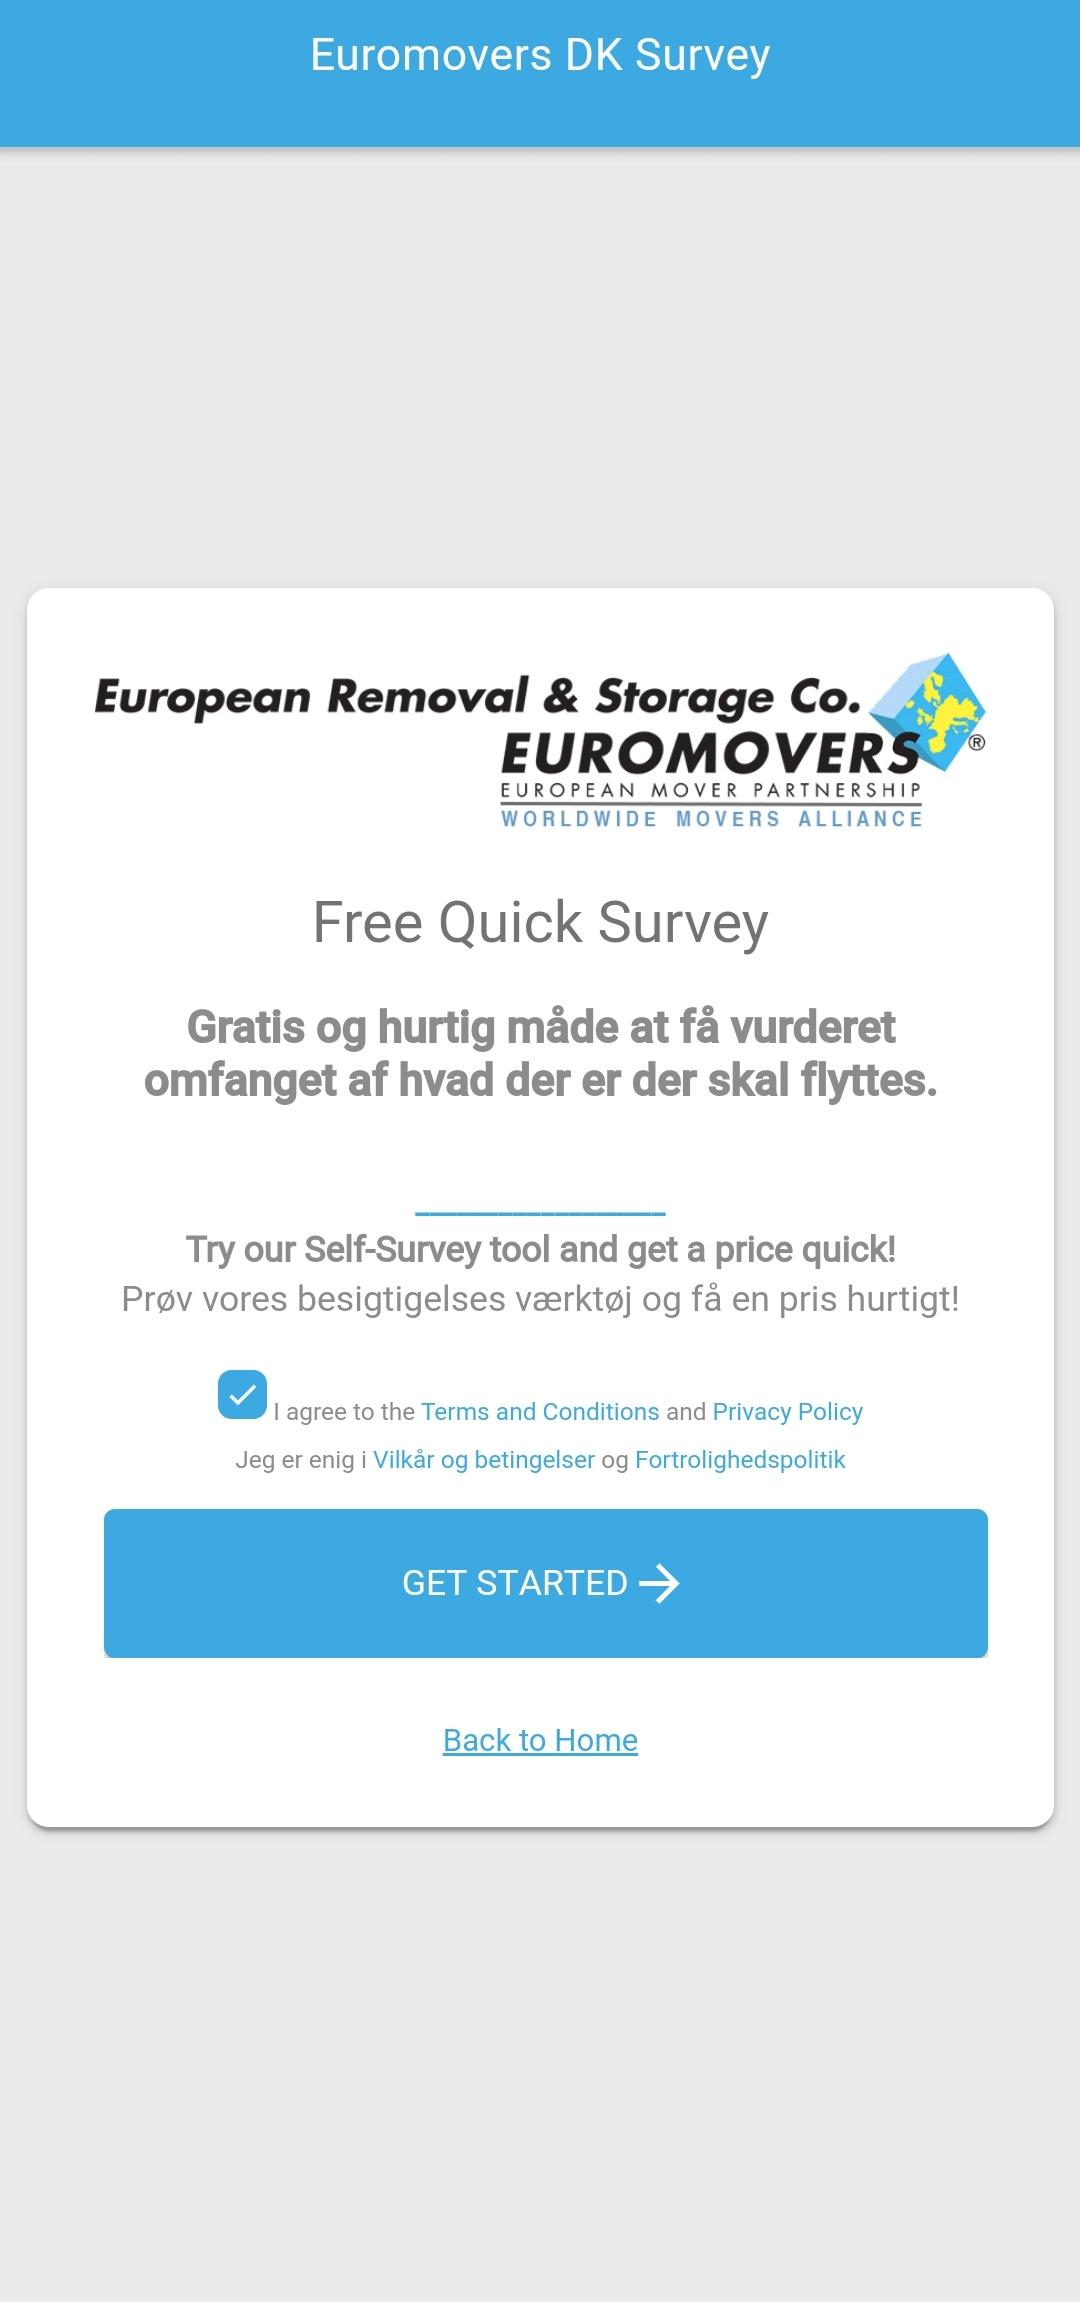 Euromovers DK Survey for Android - APK Download